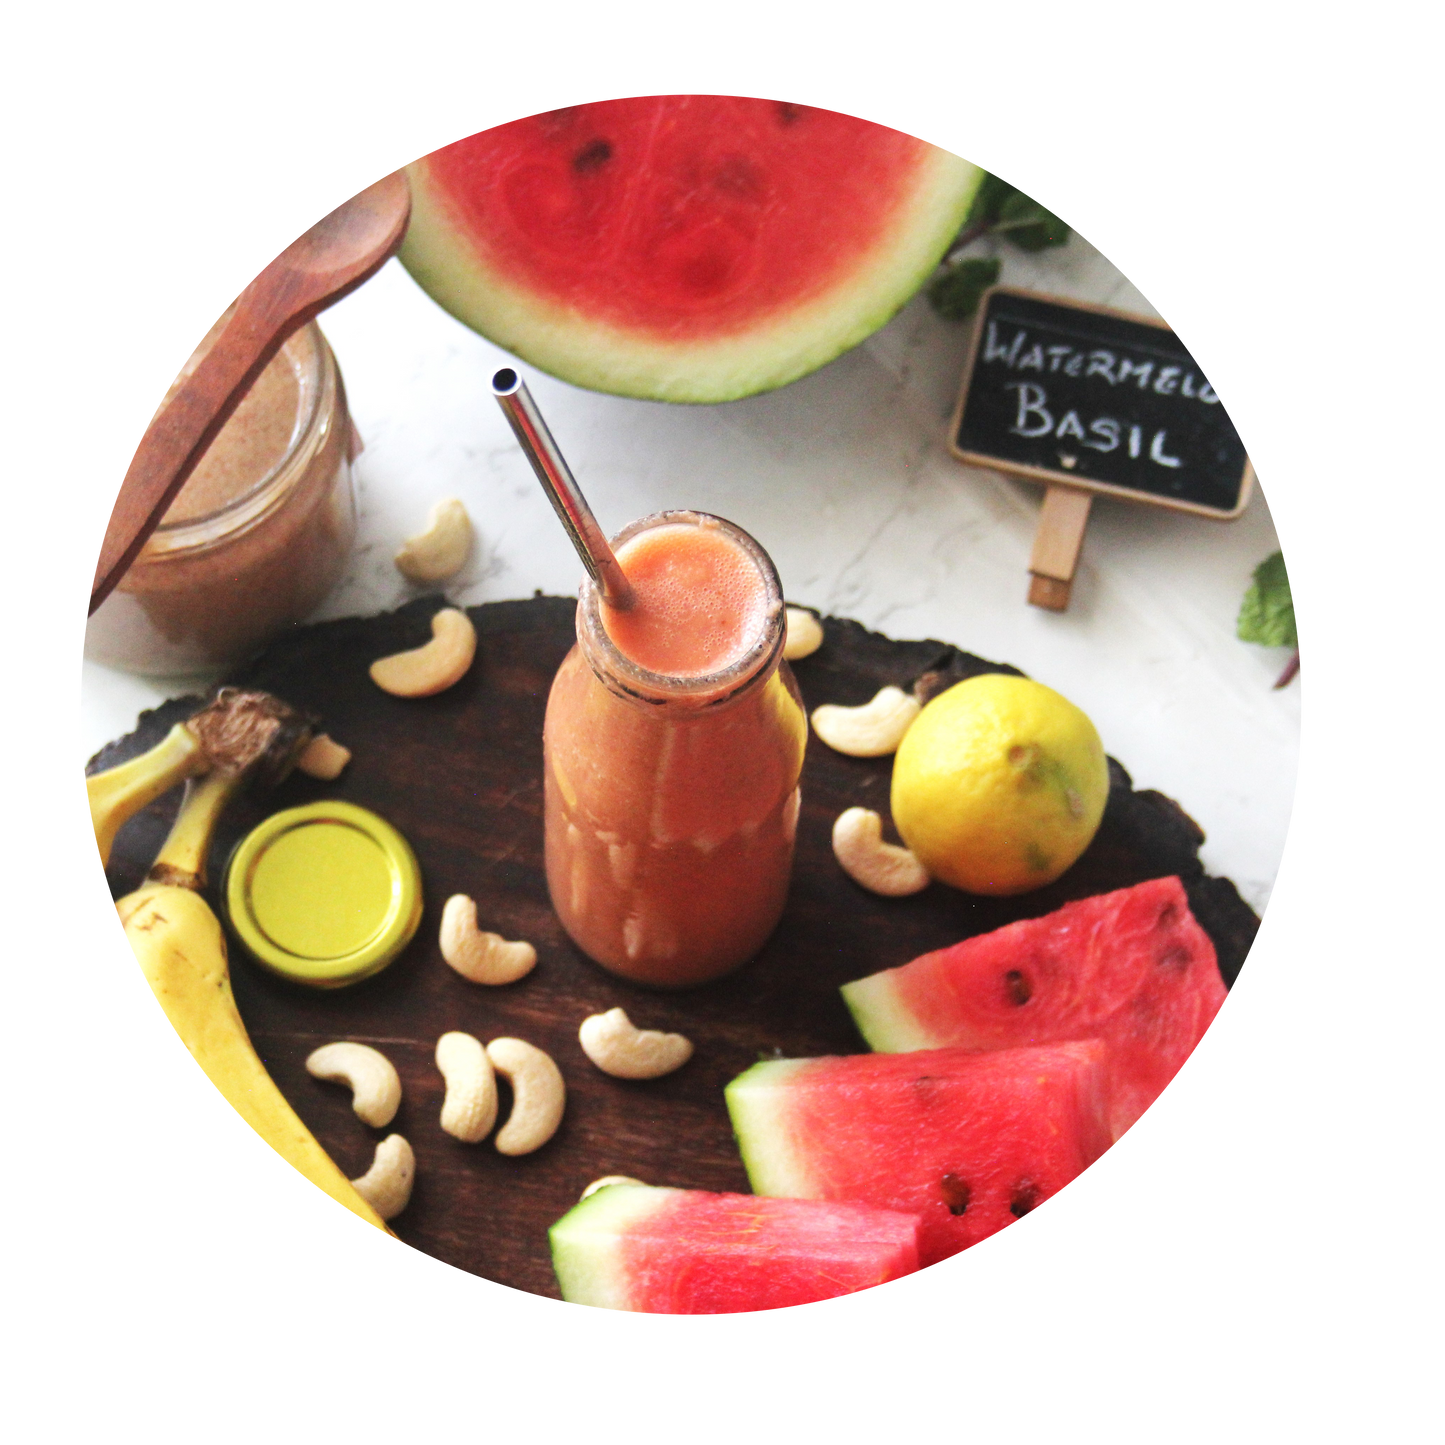 Smoothies - Monthly Subscription